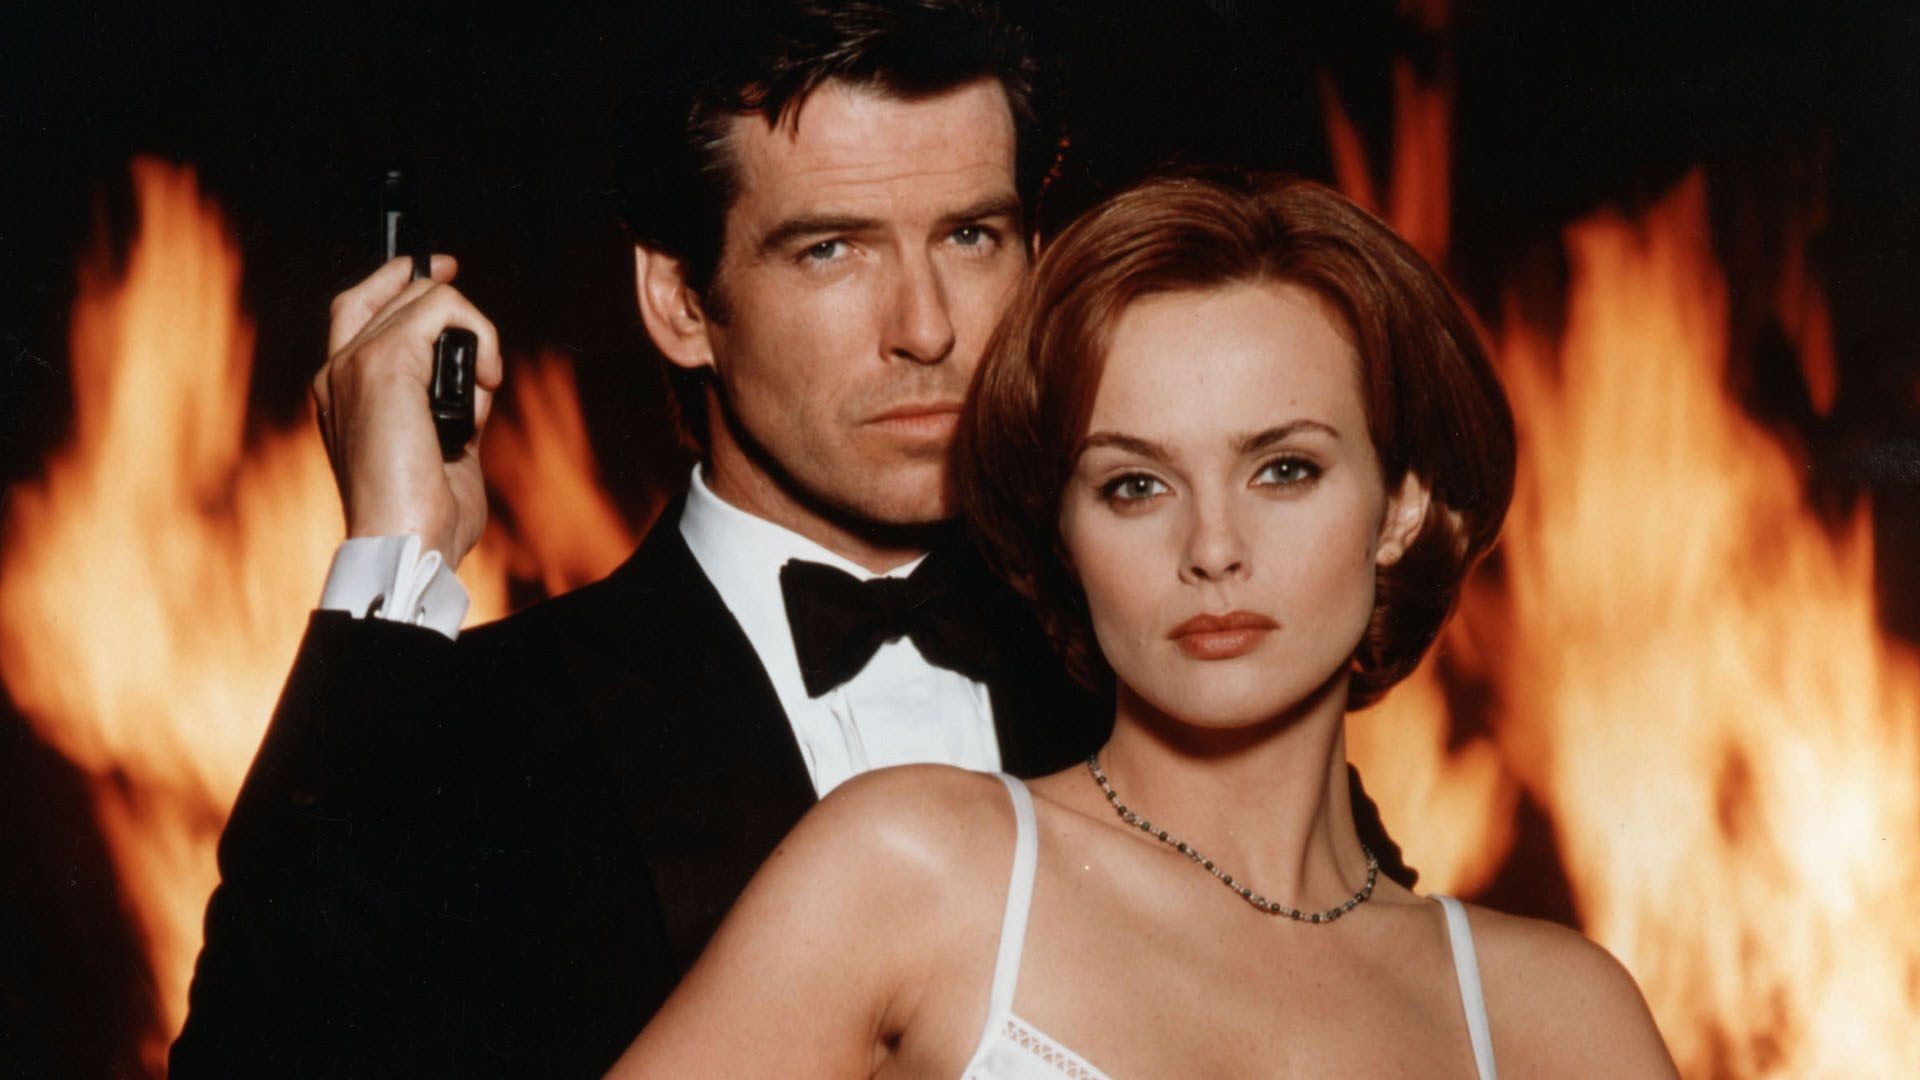 Pierce Brosnan says it’s time for a female Bond